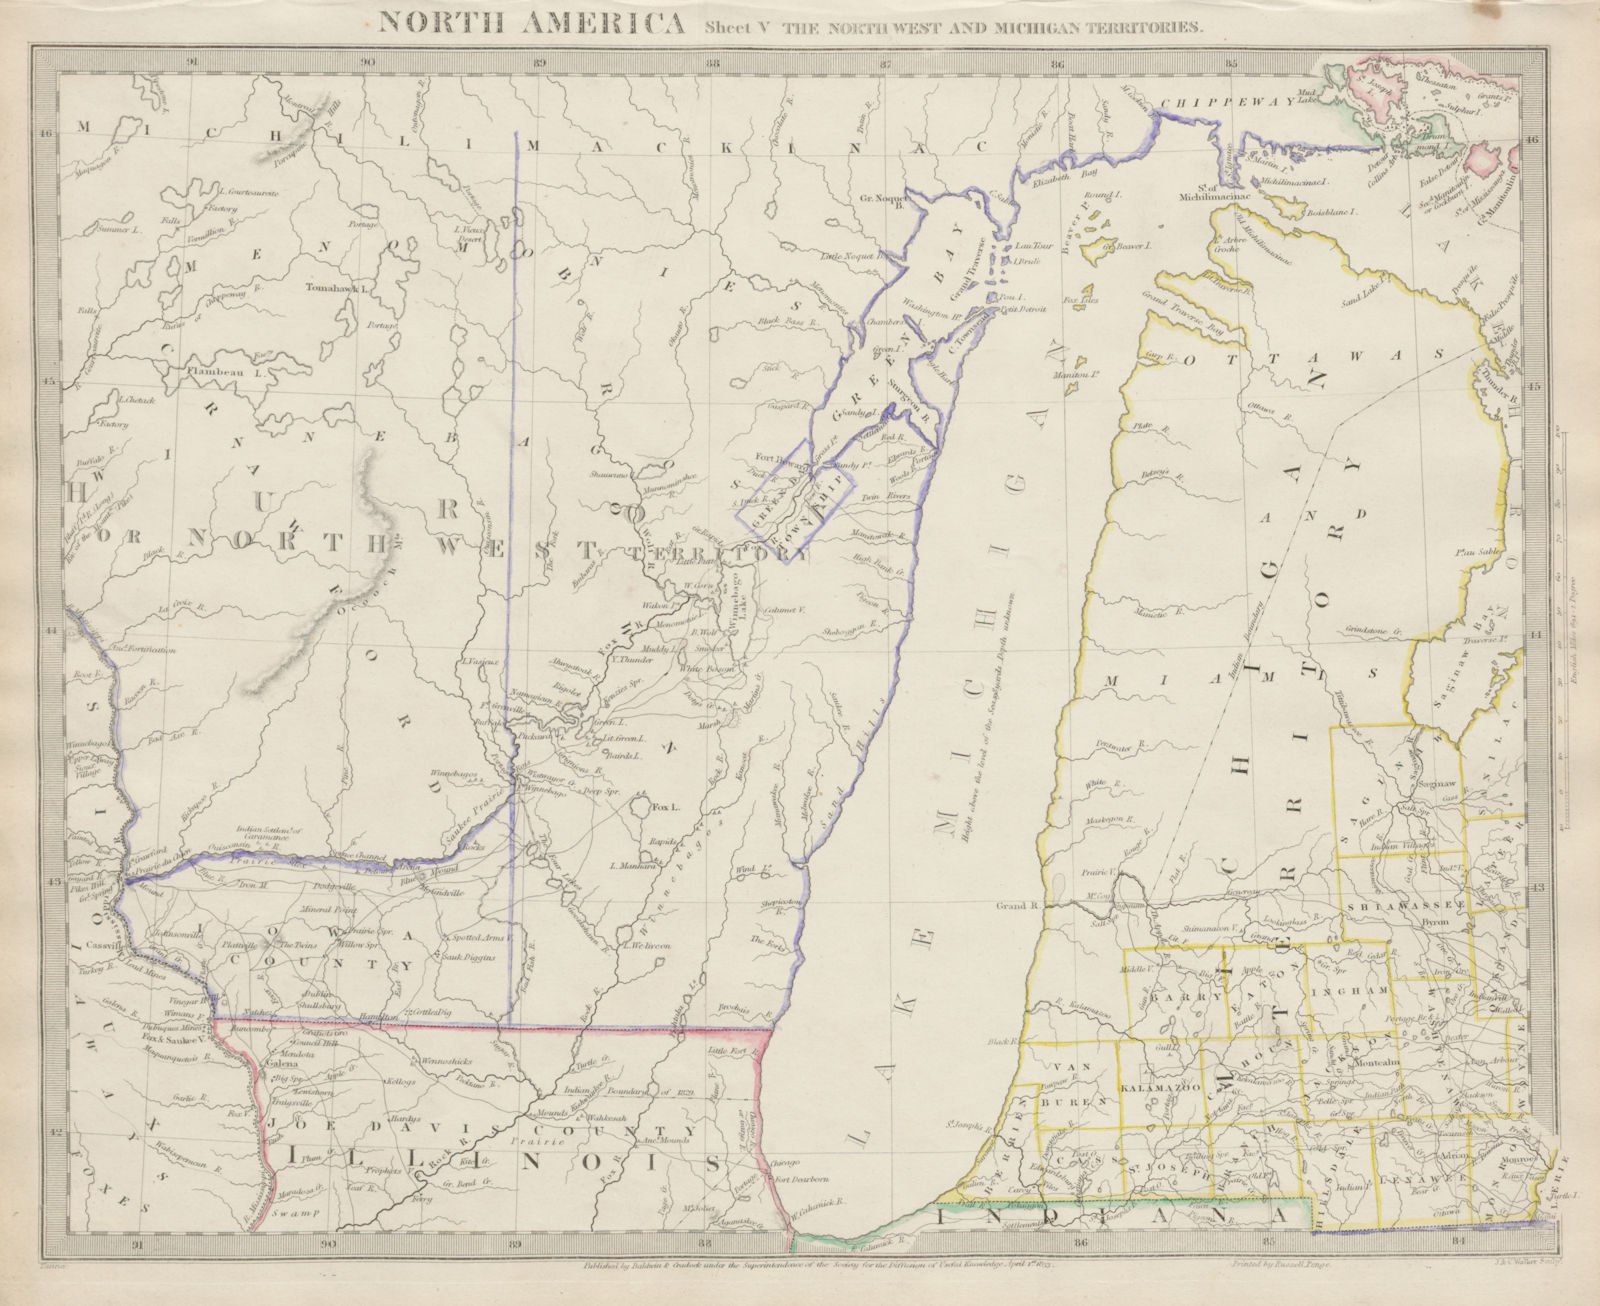 LAKE MICHIGAN Wisconsin / NW Territory. Indian tribes & villages. SDUK 1844 map